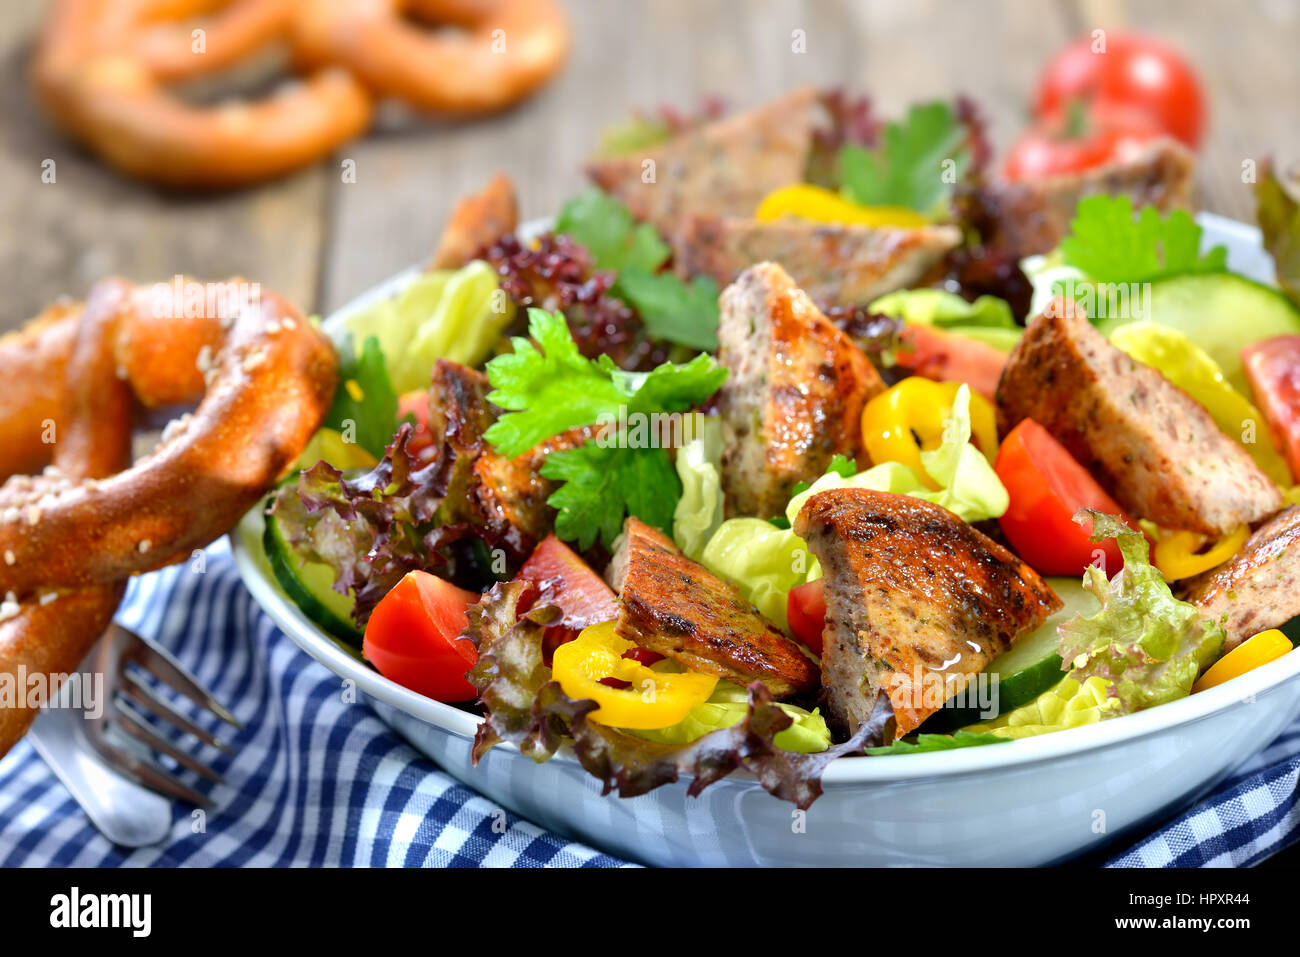 Bavarian salad: Pieces of fried sausage with pig spleen served on a colorful mixed salad Stock Photo